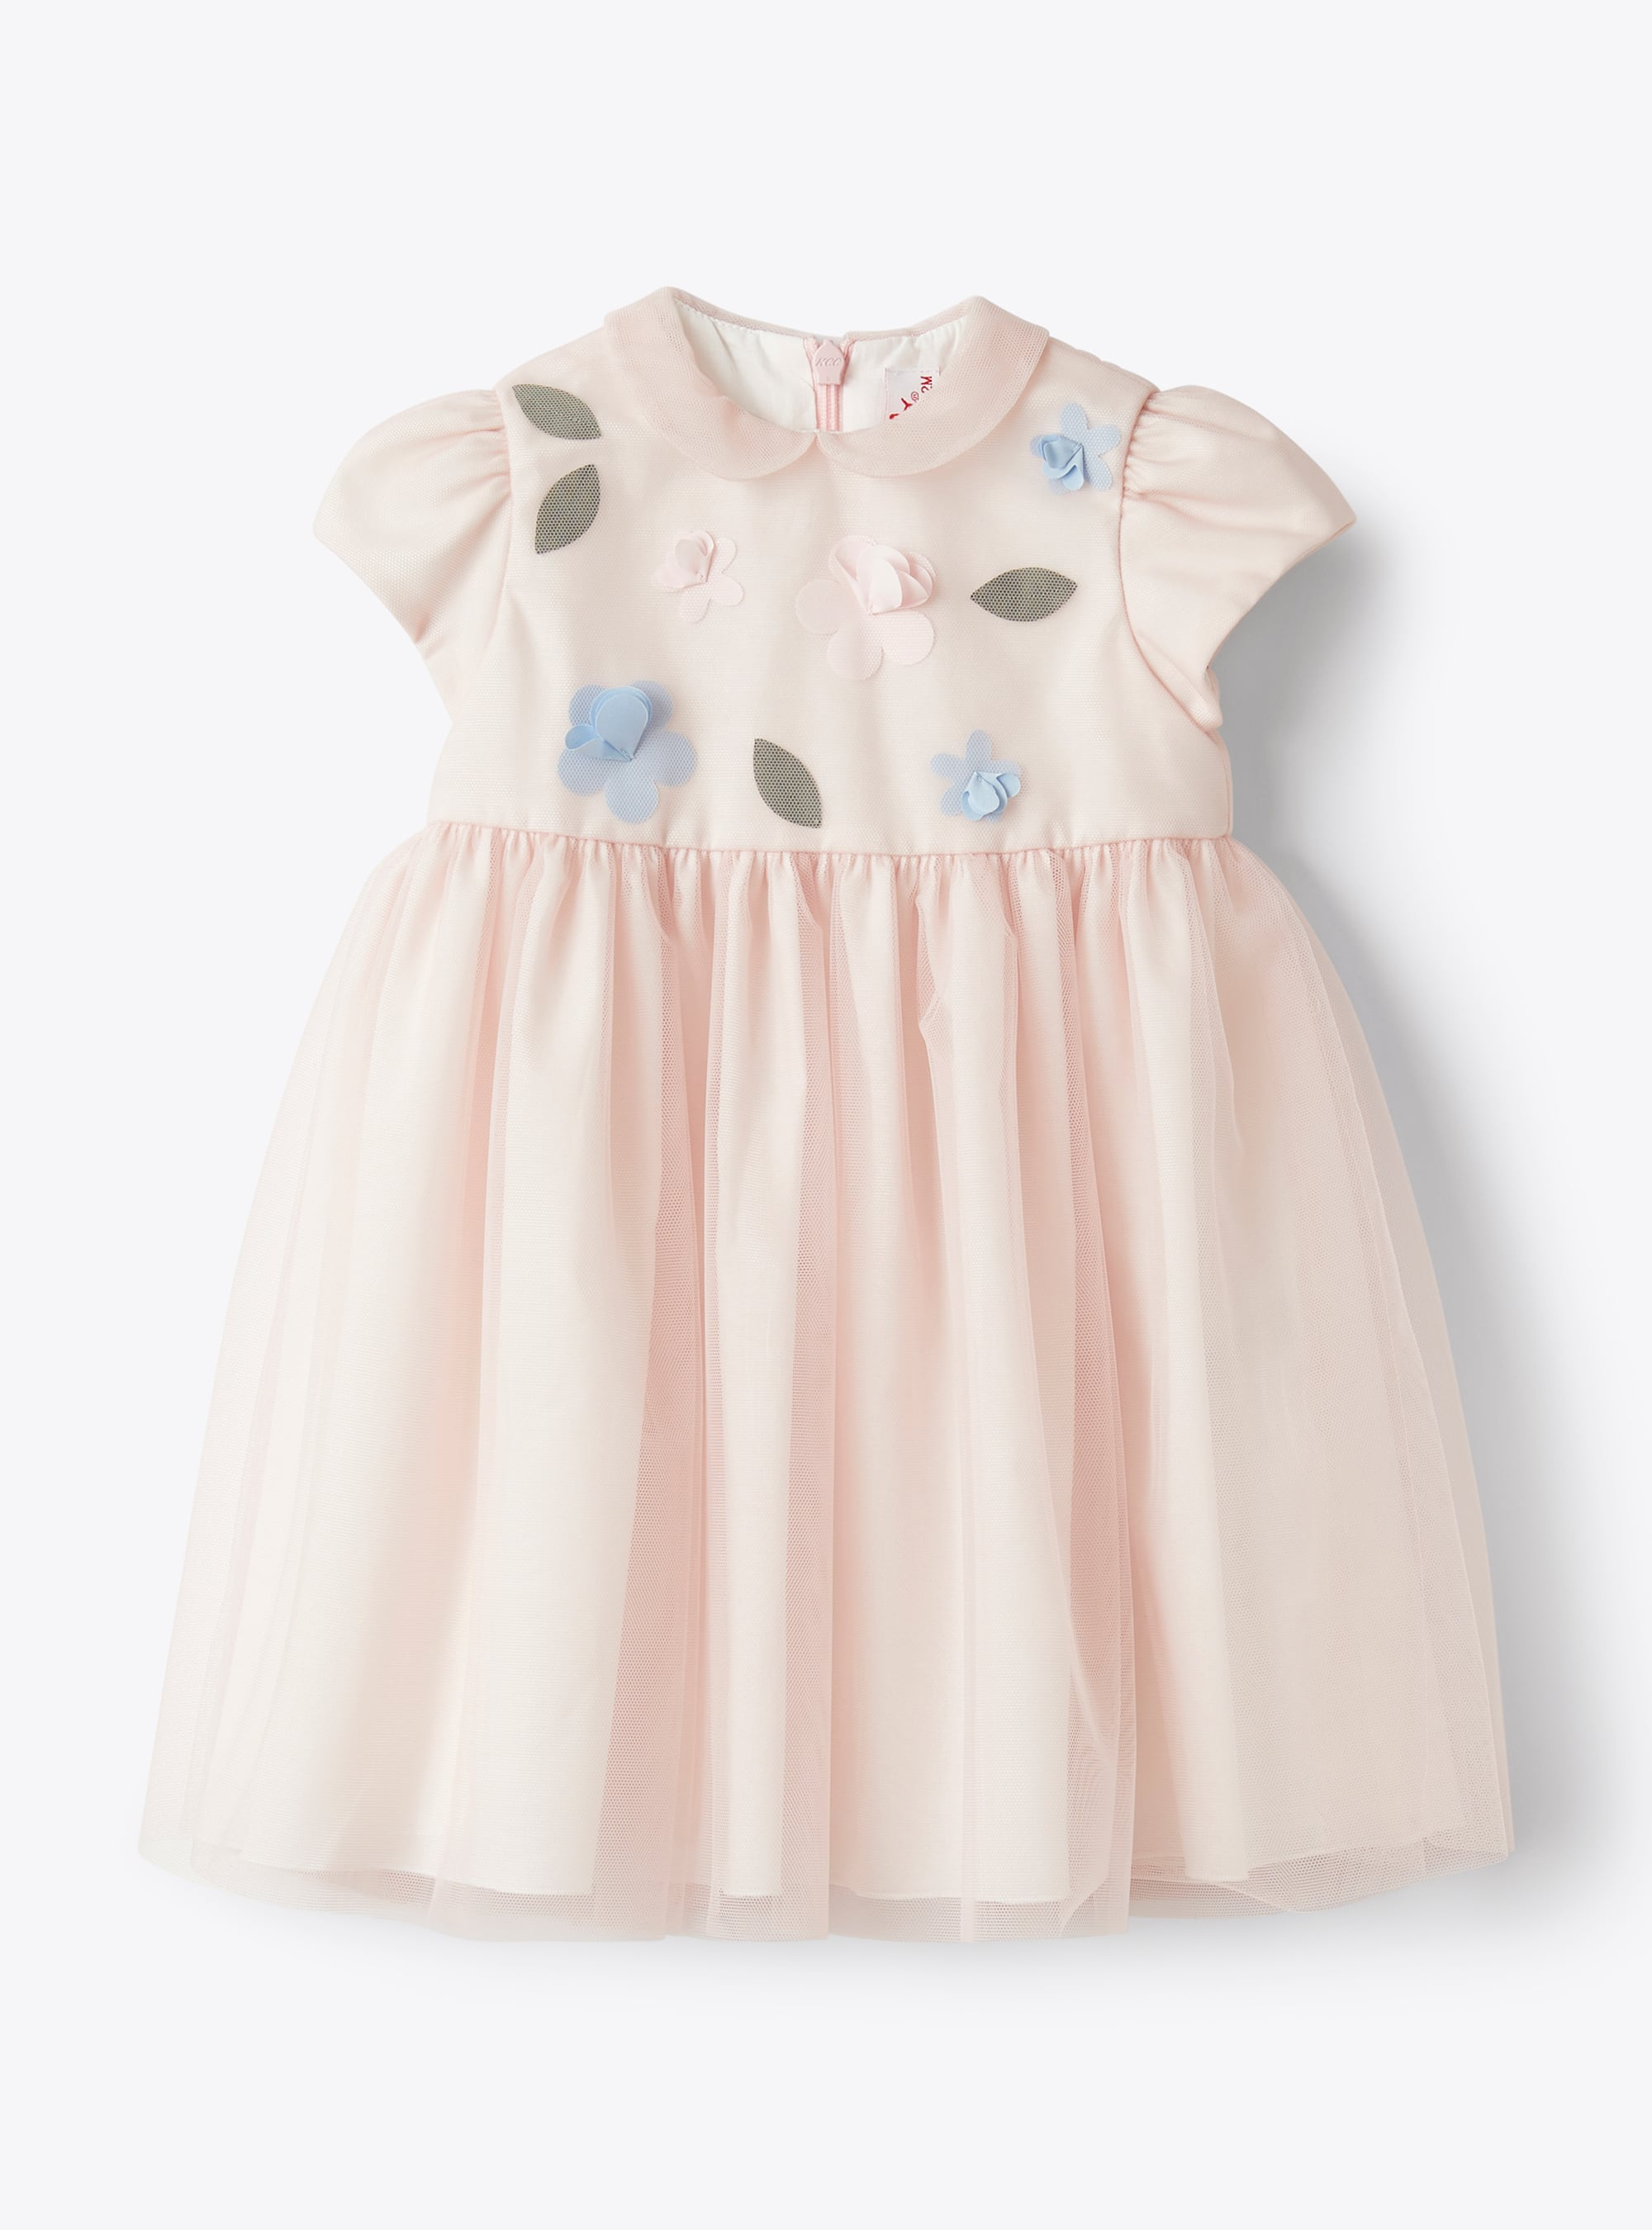 Dress for baby girls in tulle with appliqué flowers - Dresses - Il Gufo